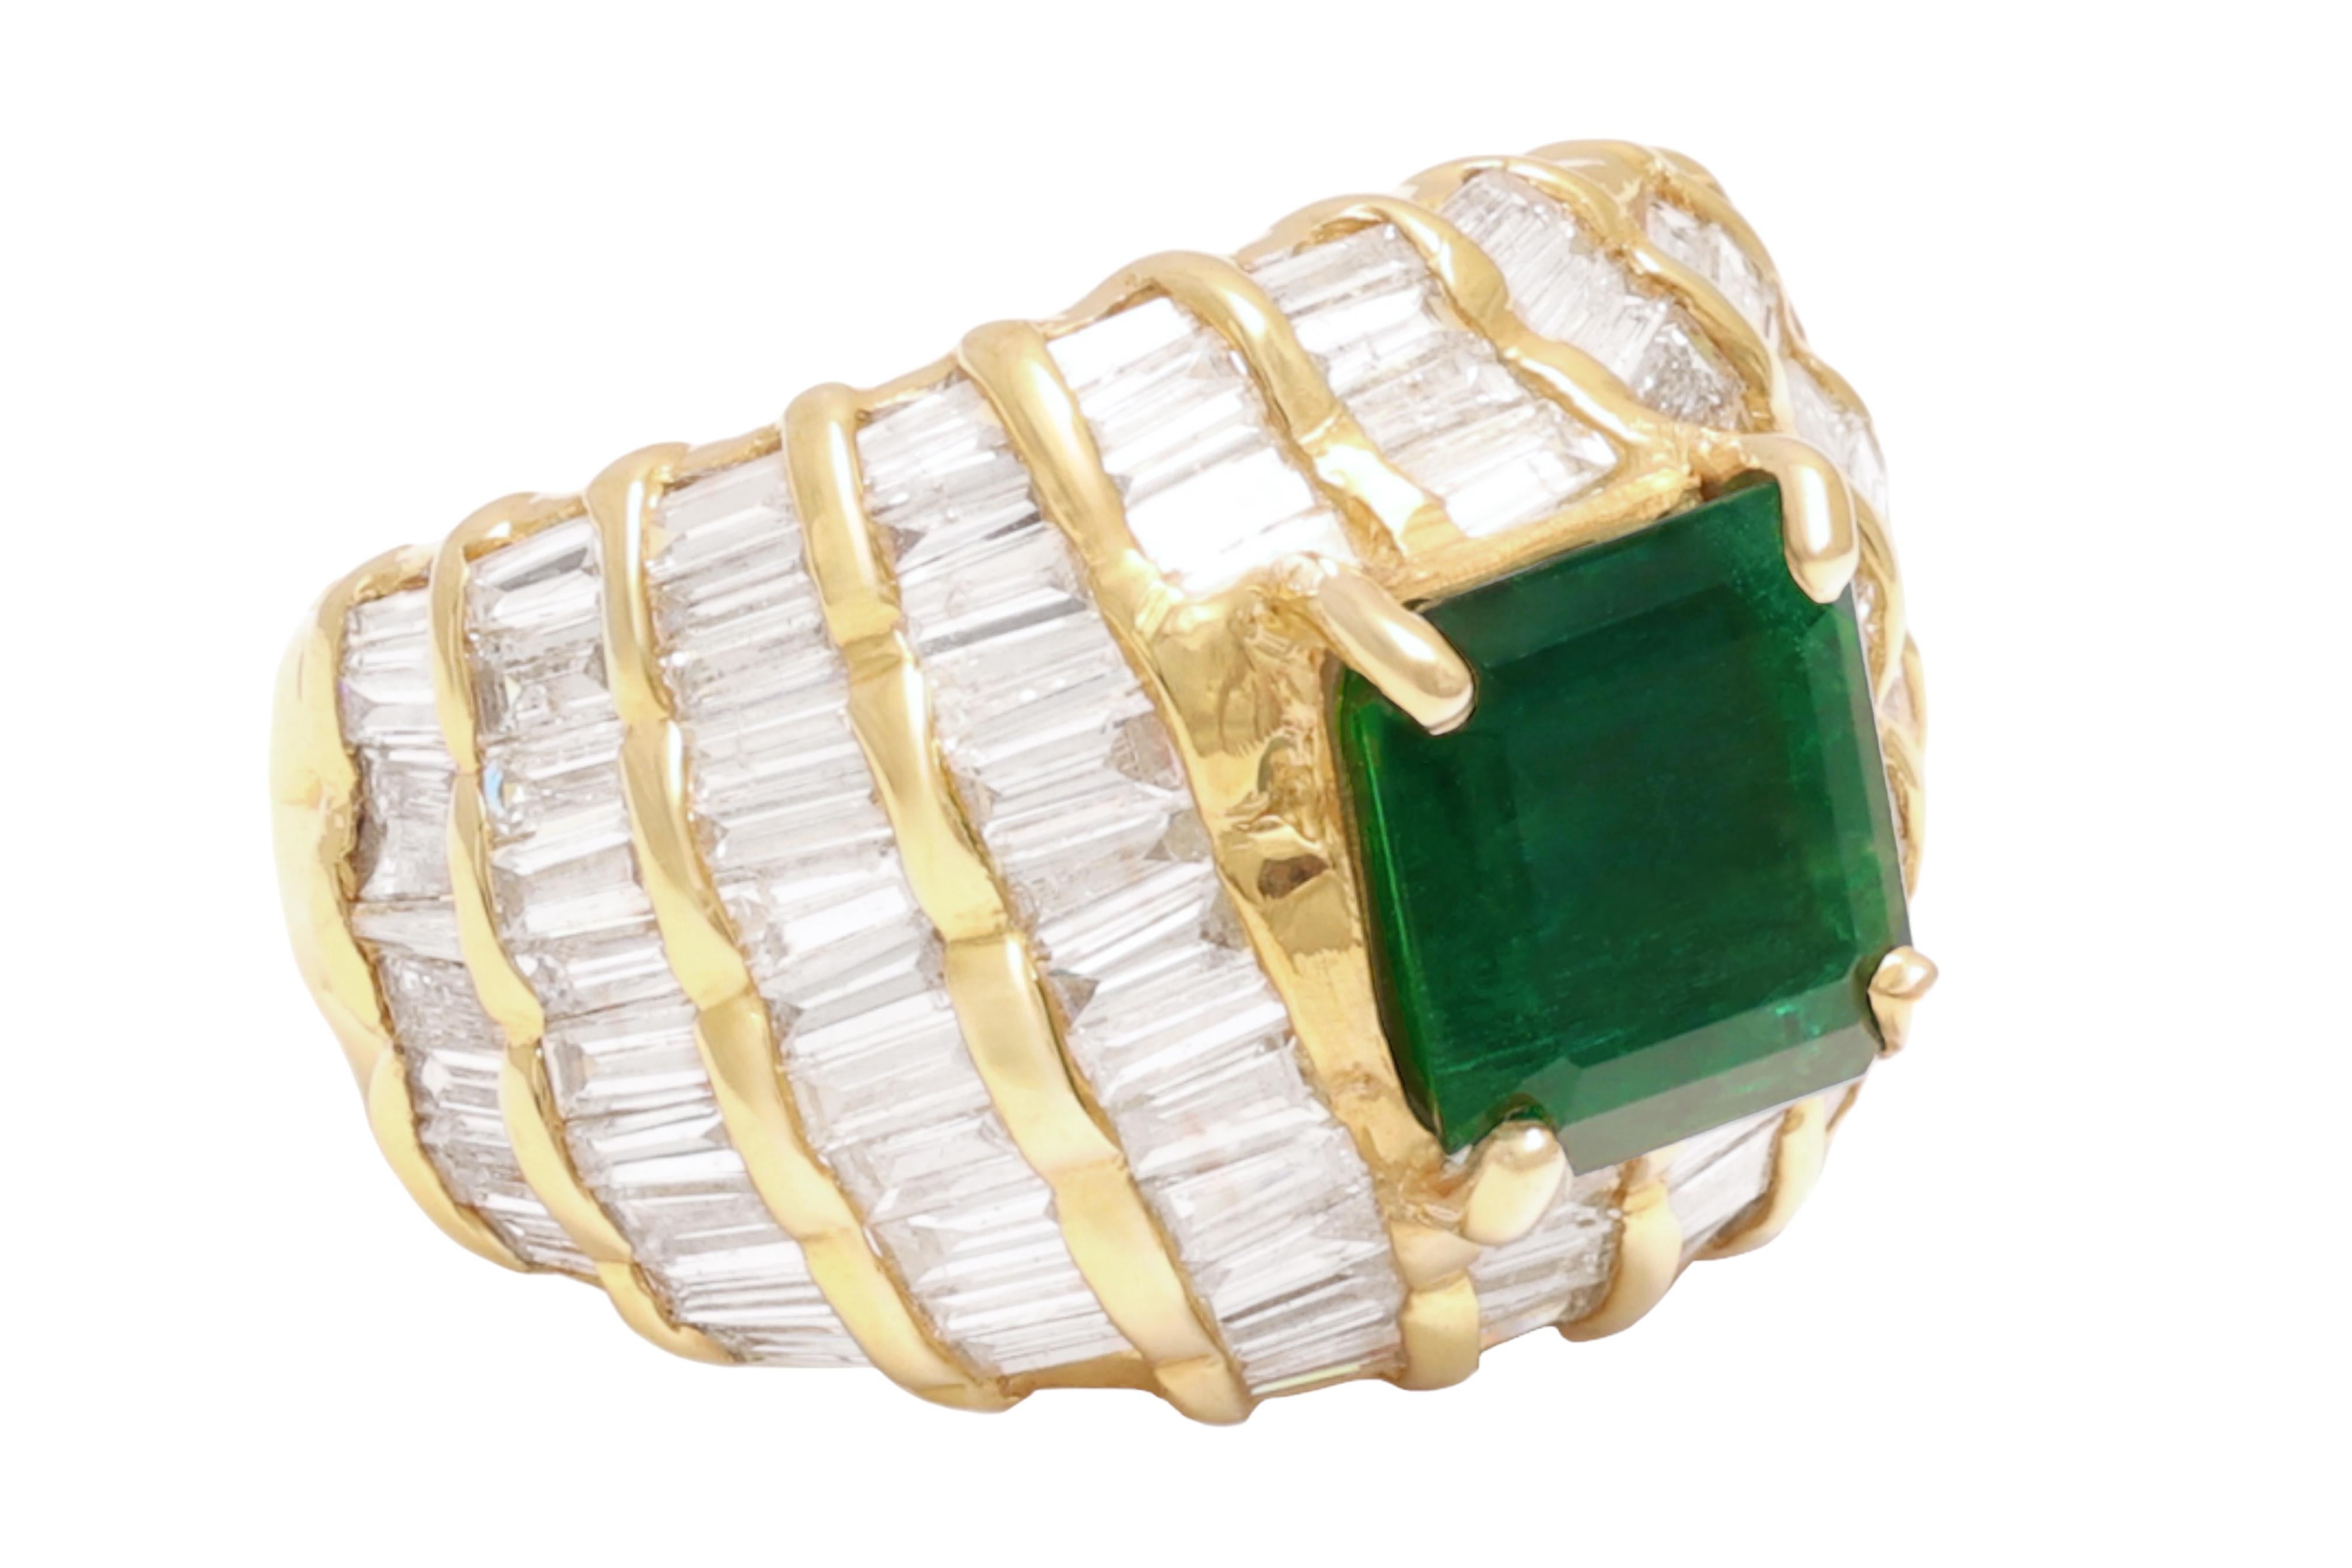 Carat Gemlab Certified 2.54 Carat Emerald Dome Ring With Baguette Diamonds

Material : 18kt yellow gold

Diamond: baguette cut diamonds : Ca 5,25 ct

Emerald: 2.54 carat Octagonal ,green emerald. Variety of beryl of natural origin, indications of